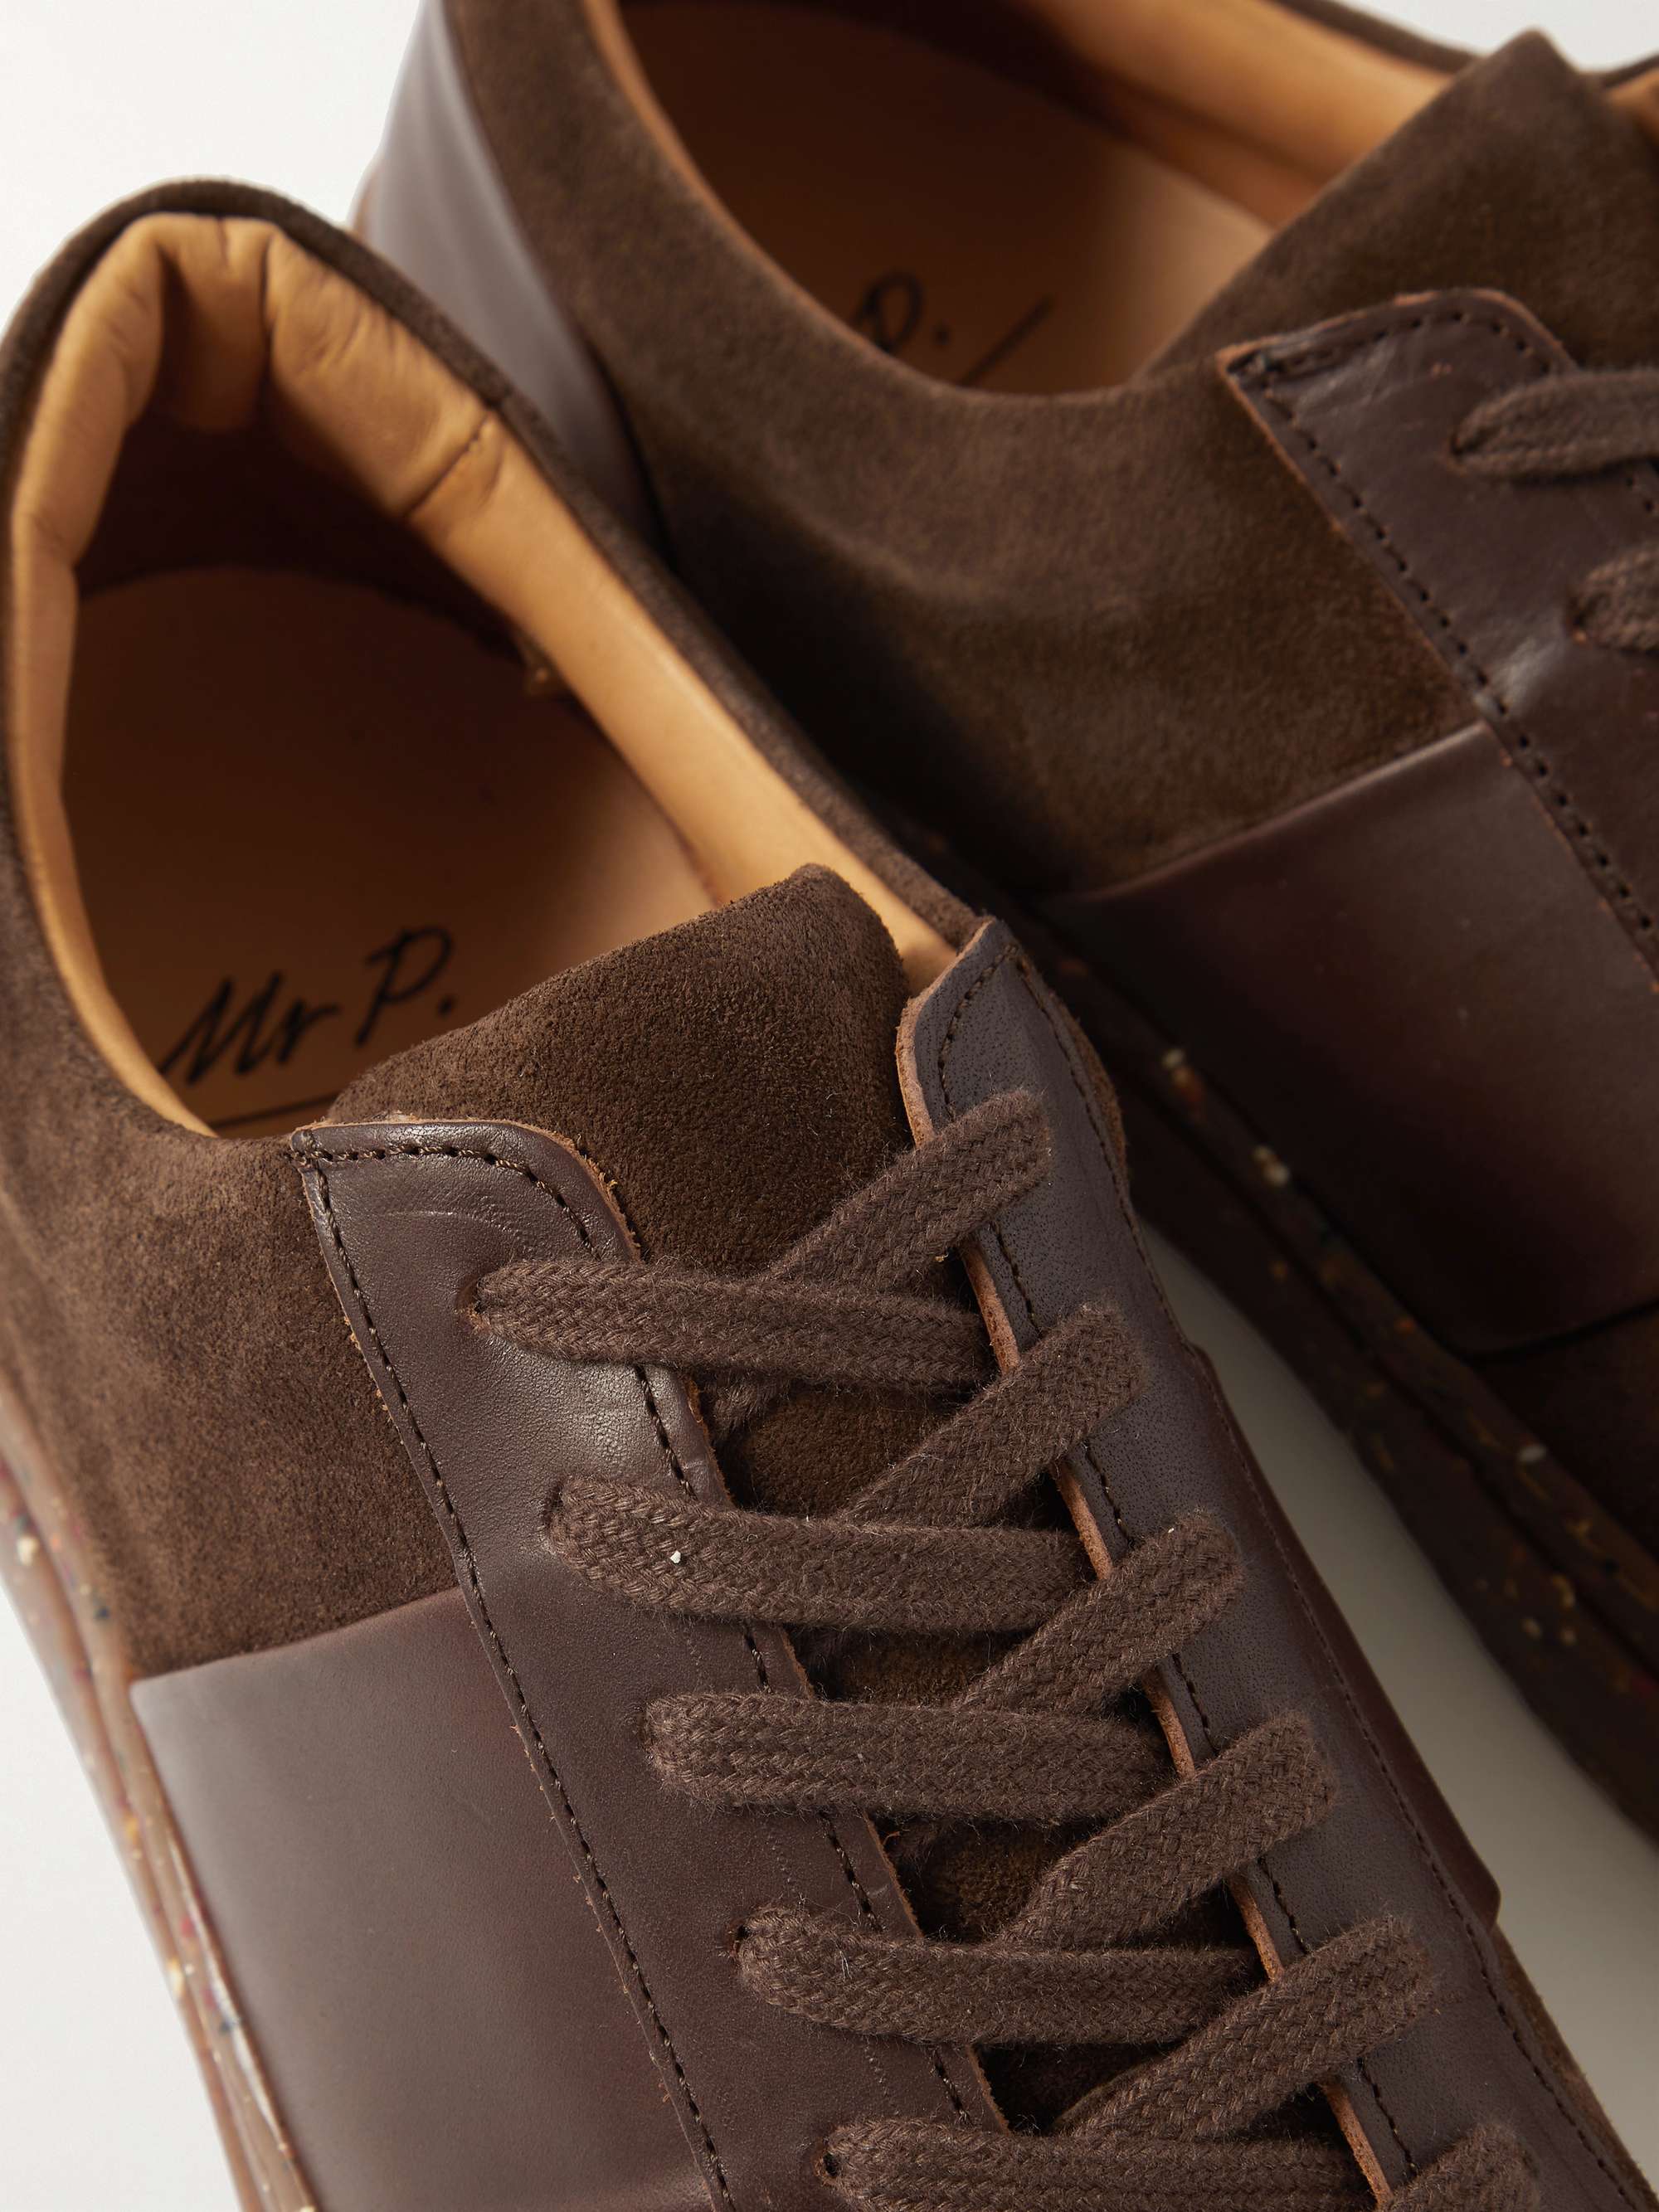 MR P. Larry Leather-Panelled Re-Suede Sneakers